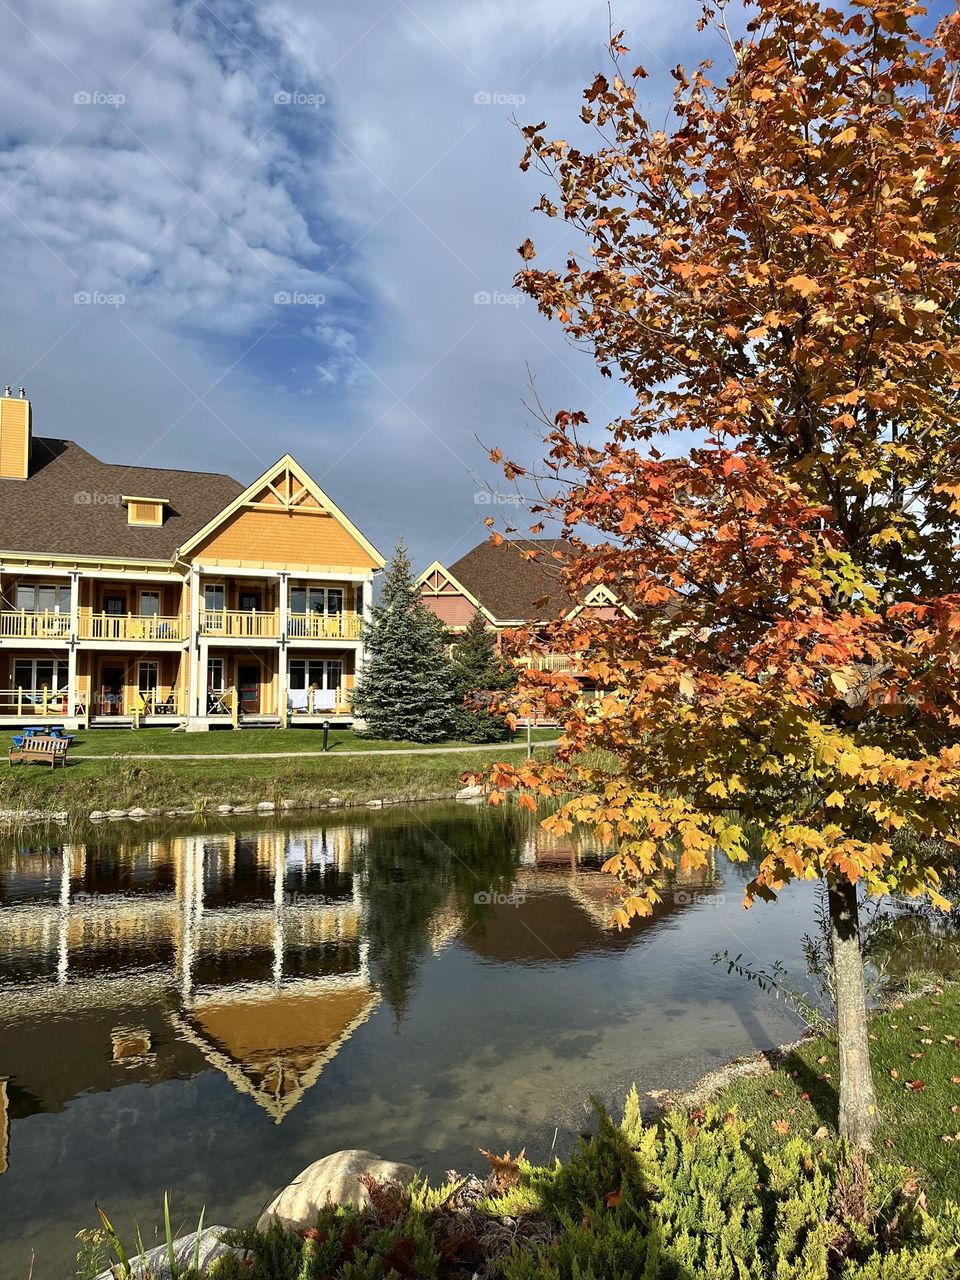 Embarc Vacation Homes at Blue are clustered around a traditional mill pond, vacation home image in the pond , Autumn  leaf colour changing tree , sun and clouds 